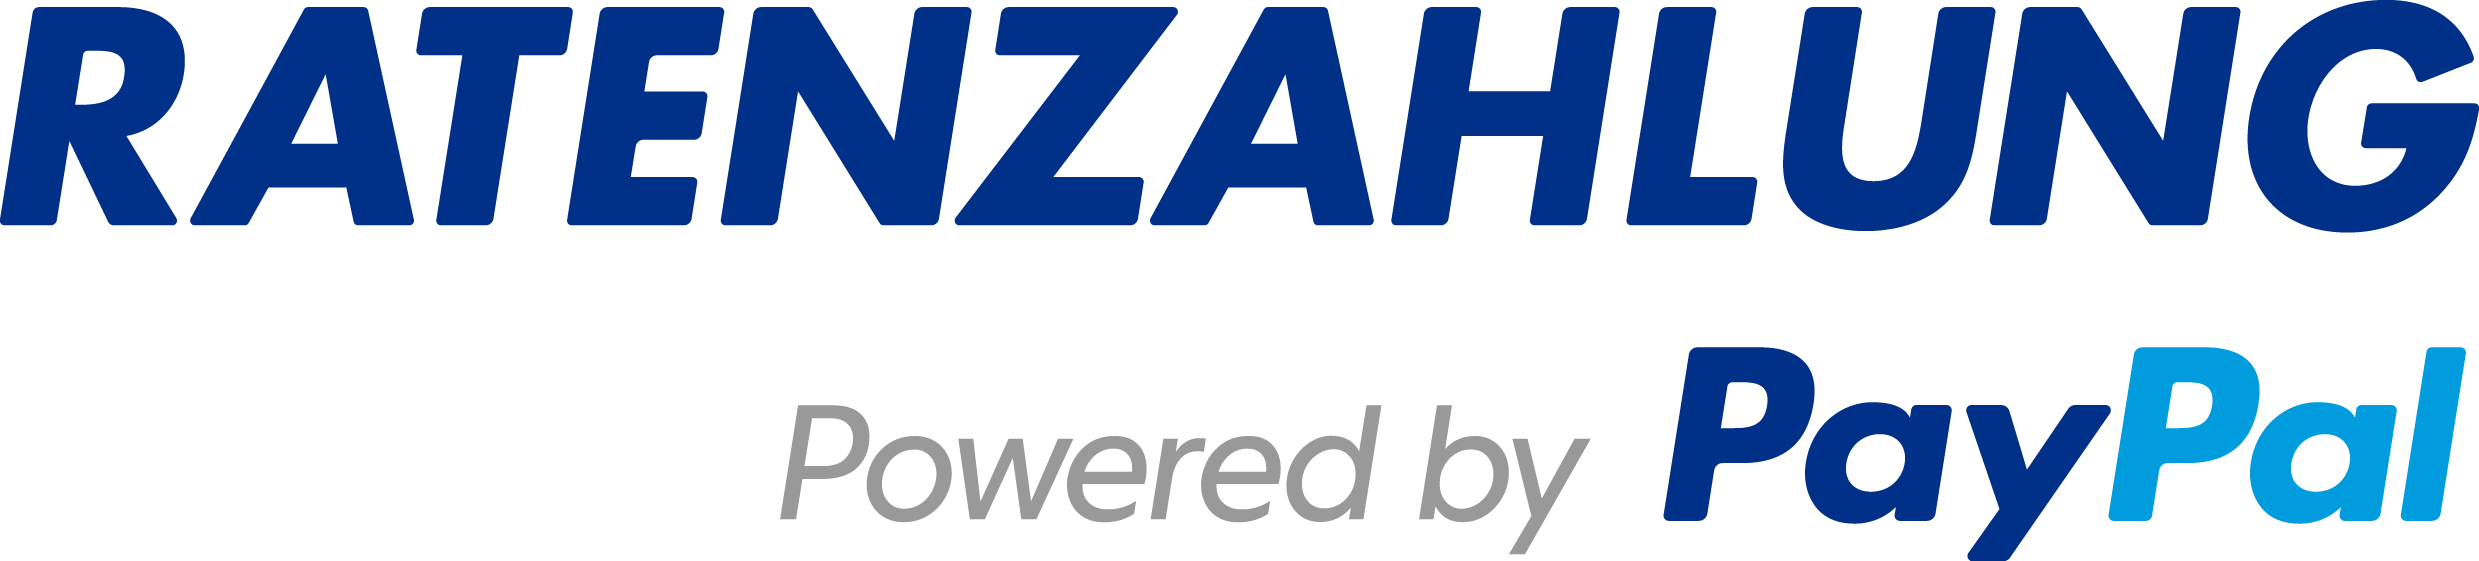 paypal ratenzahlung logo